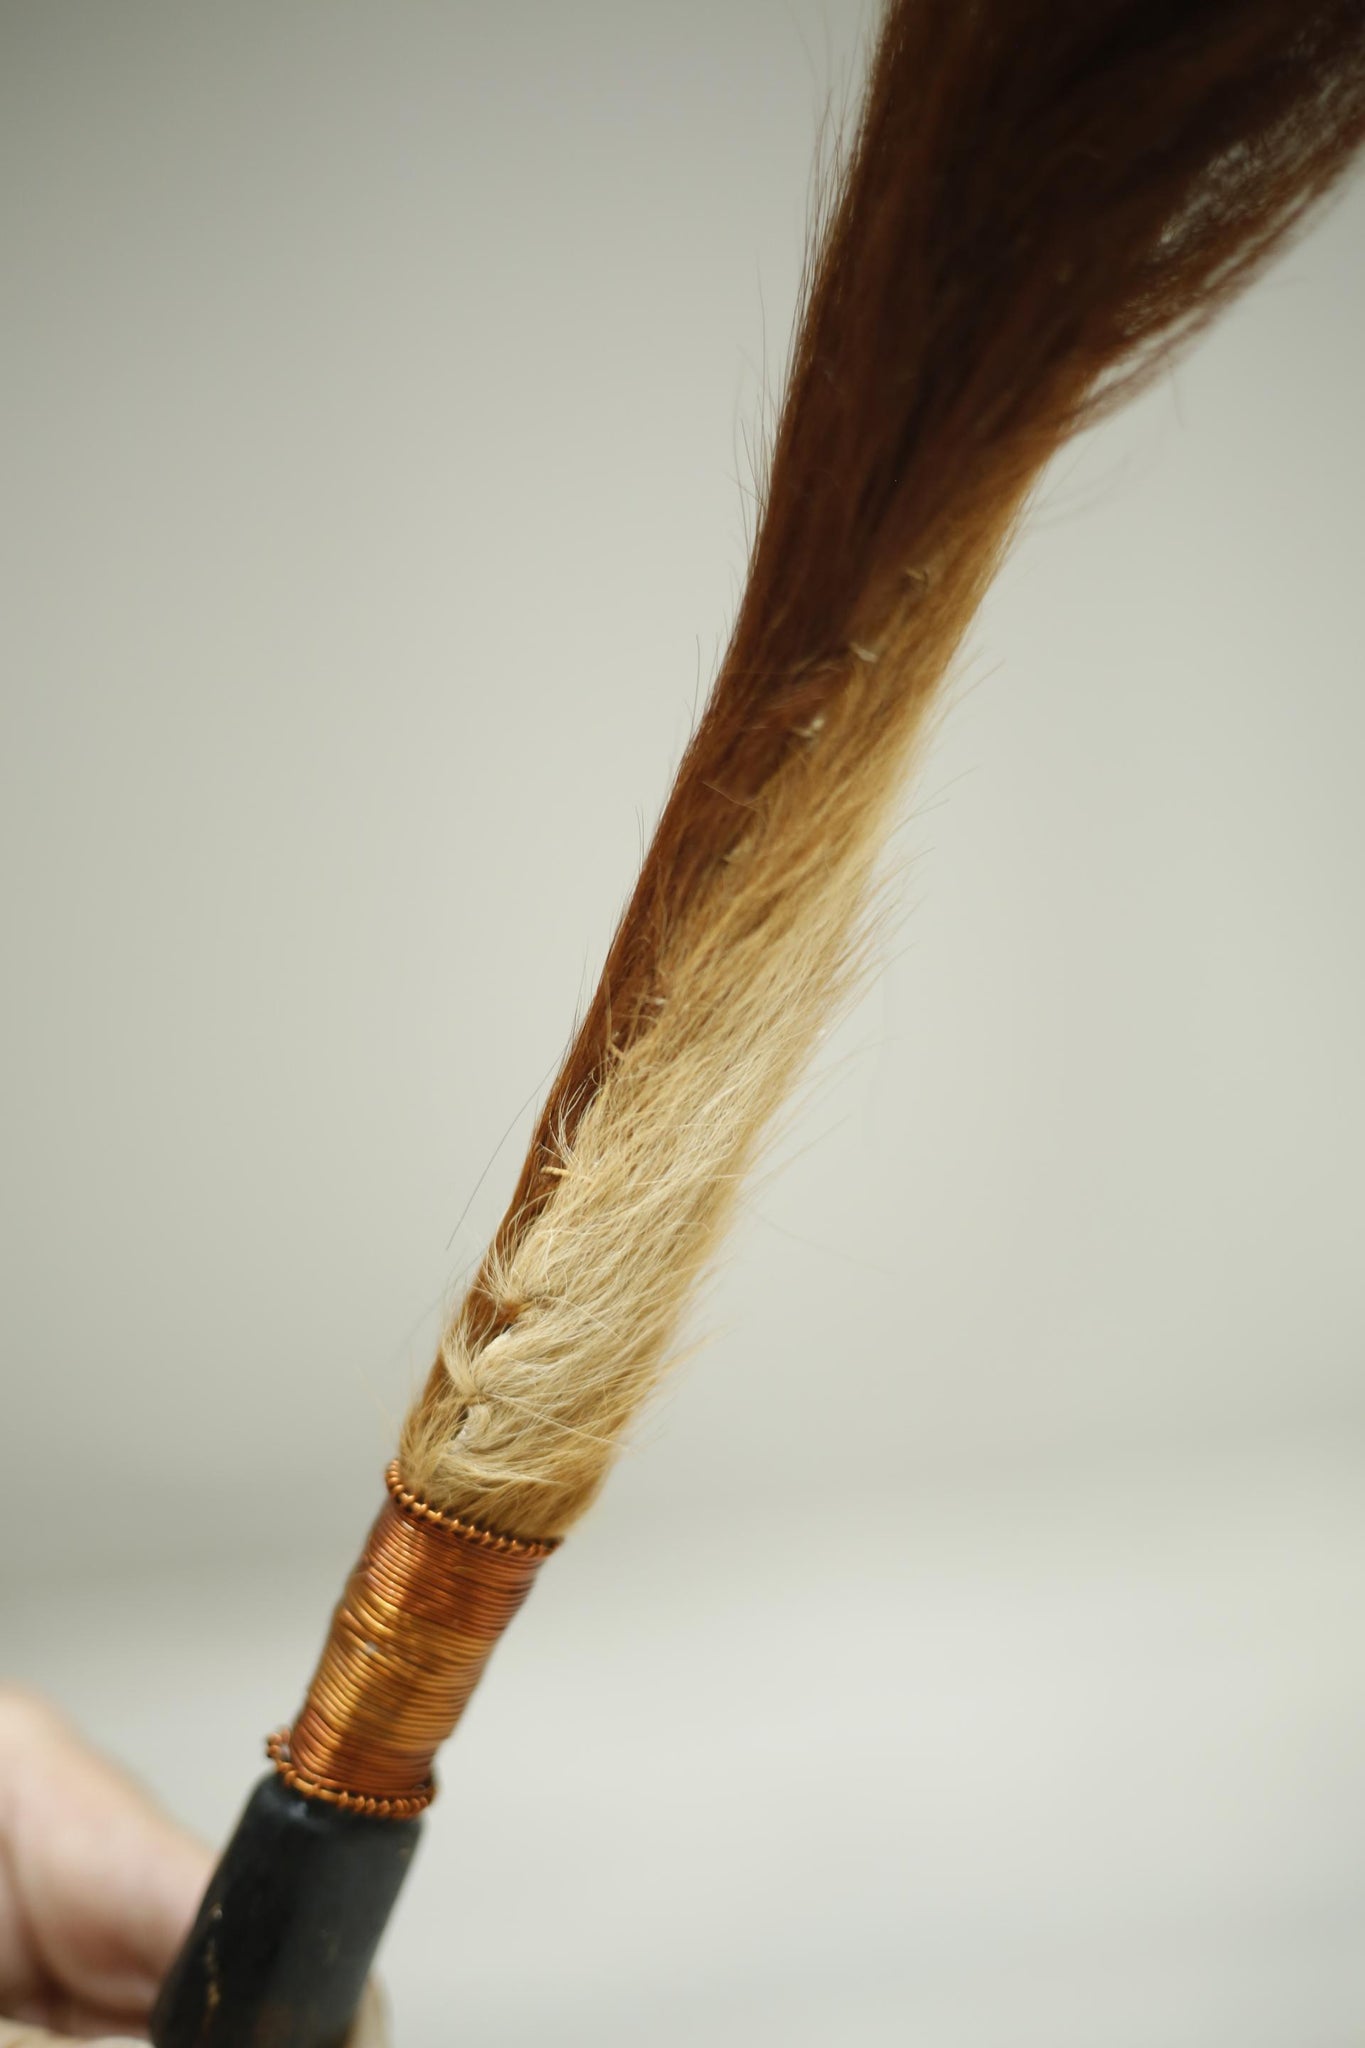 20th century African fly whisk